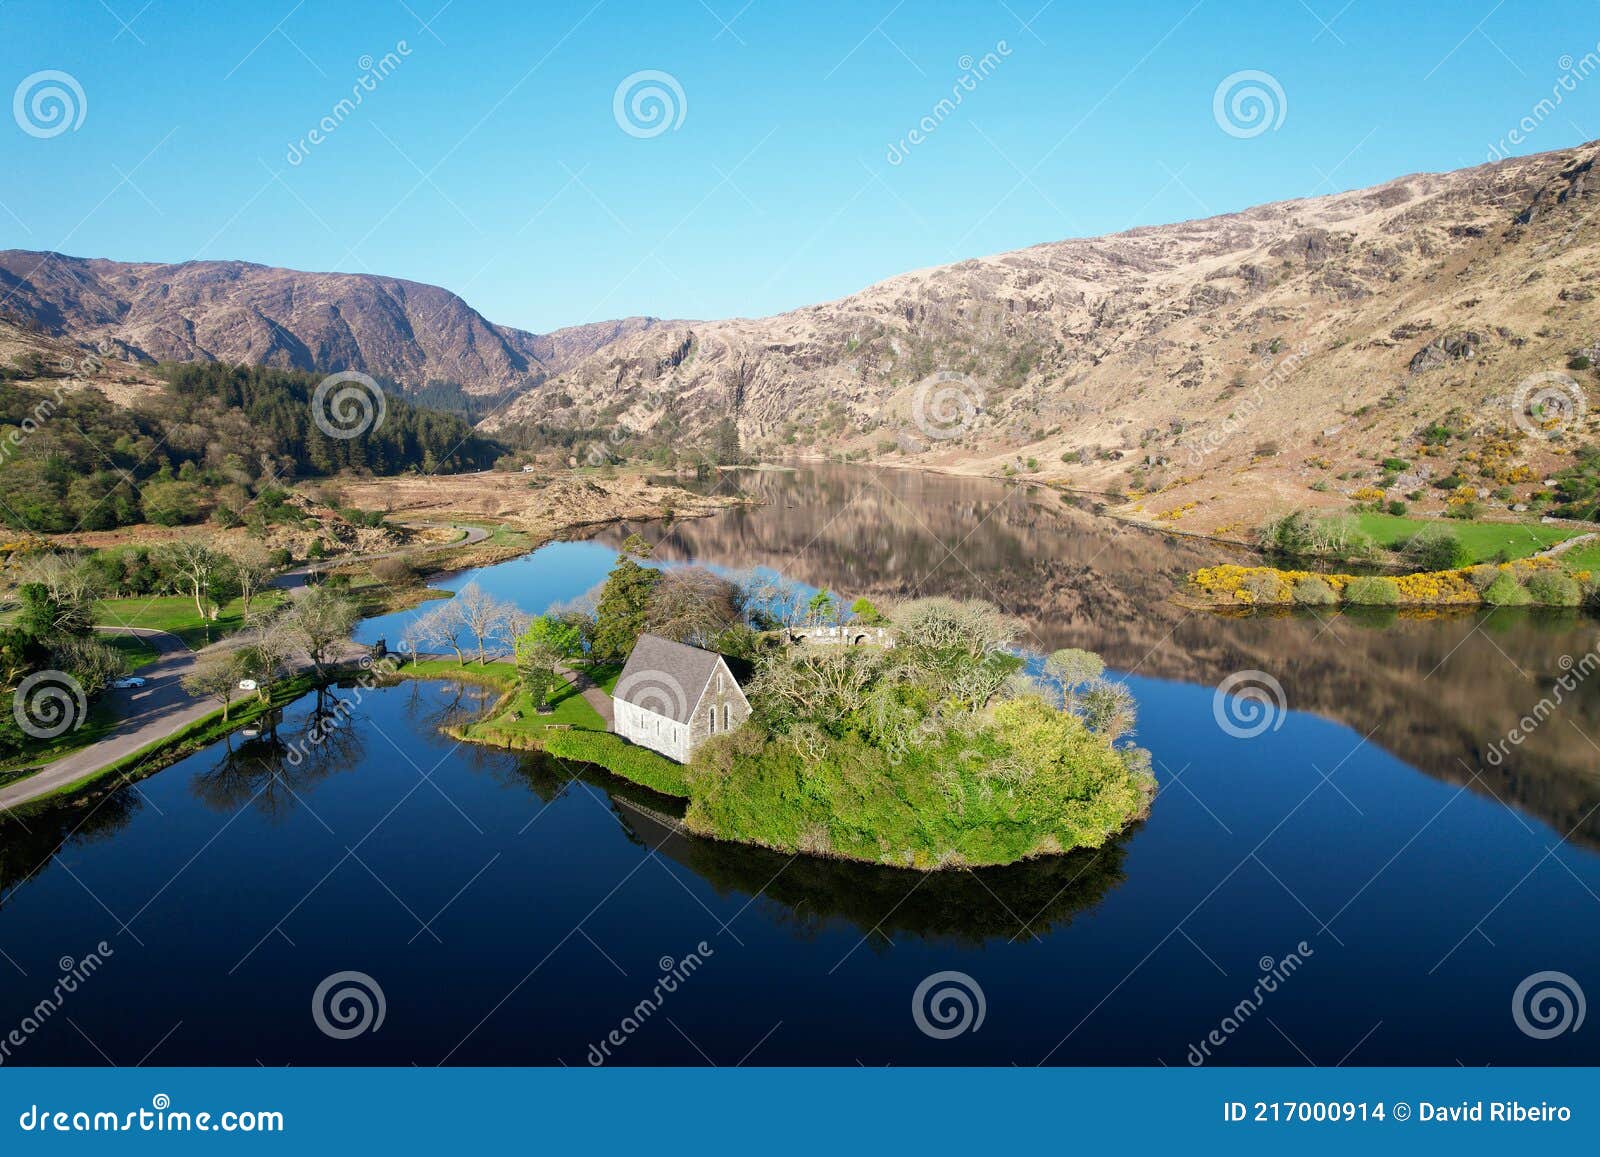 aerial view of gougane barra national park in county cork, ireland